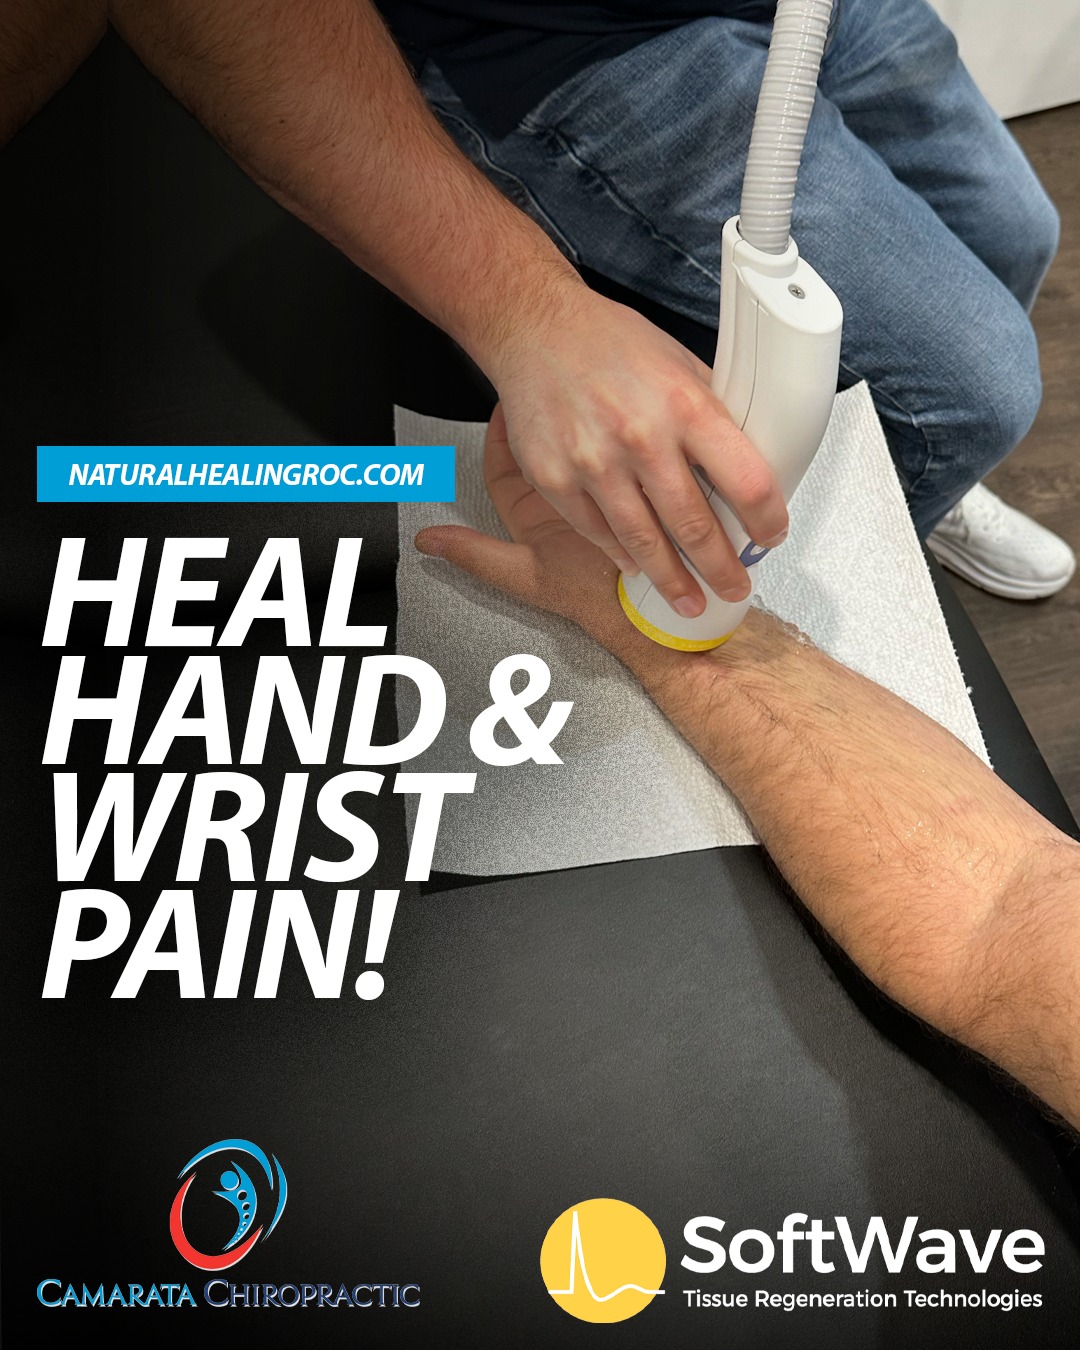 Healing Hand and Wrist Pain with SoftWave Tissue Regeneration Technology at Camarata Chiropractic